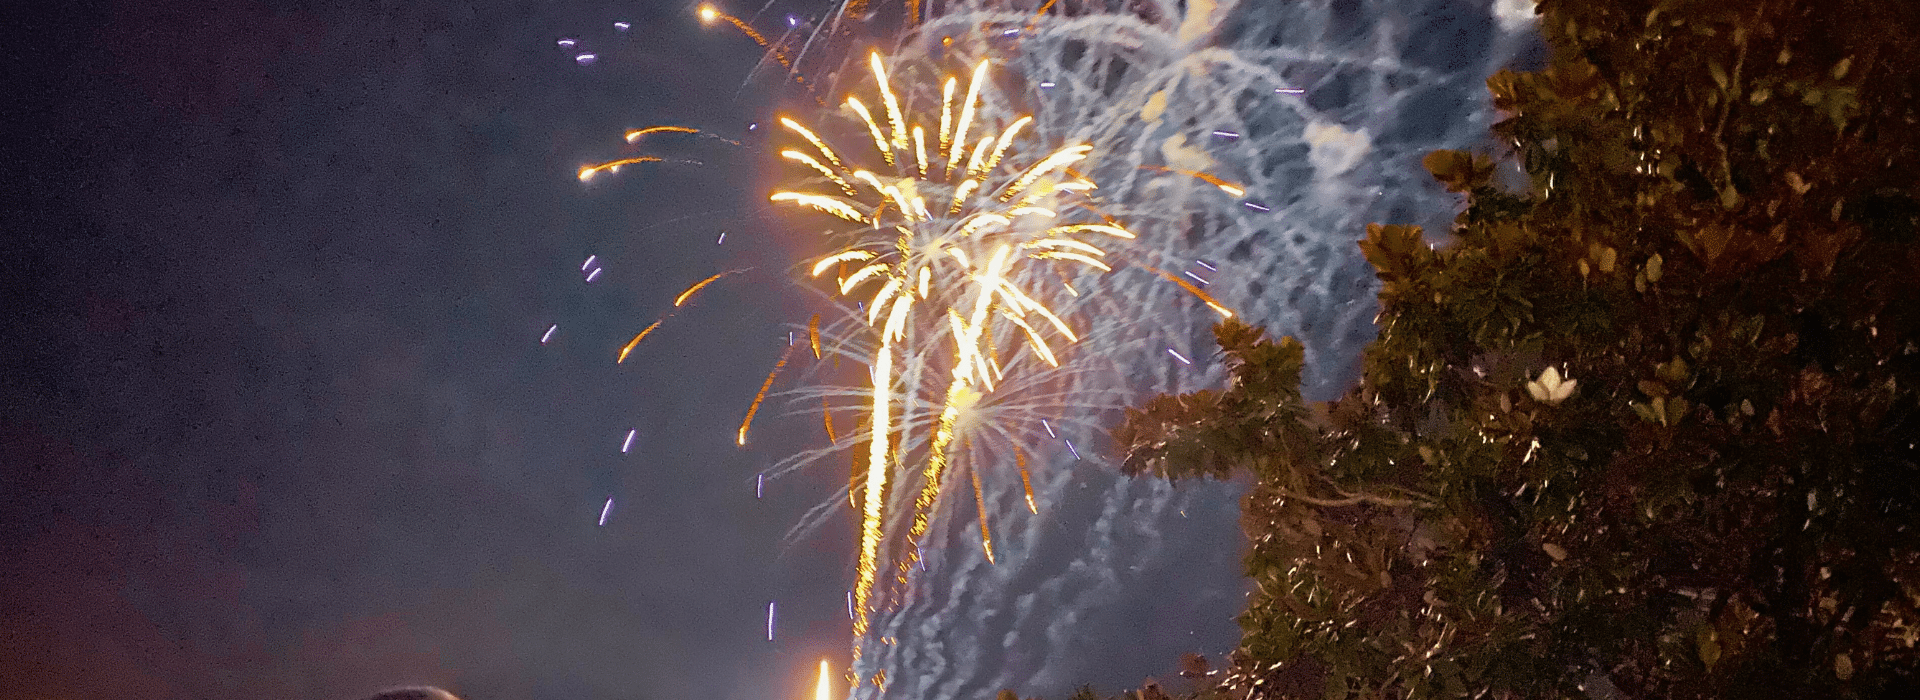 white and red fireworks